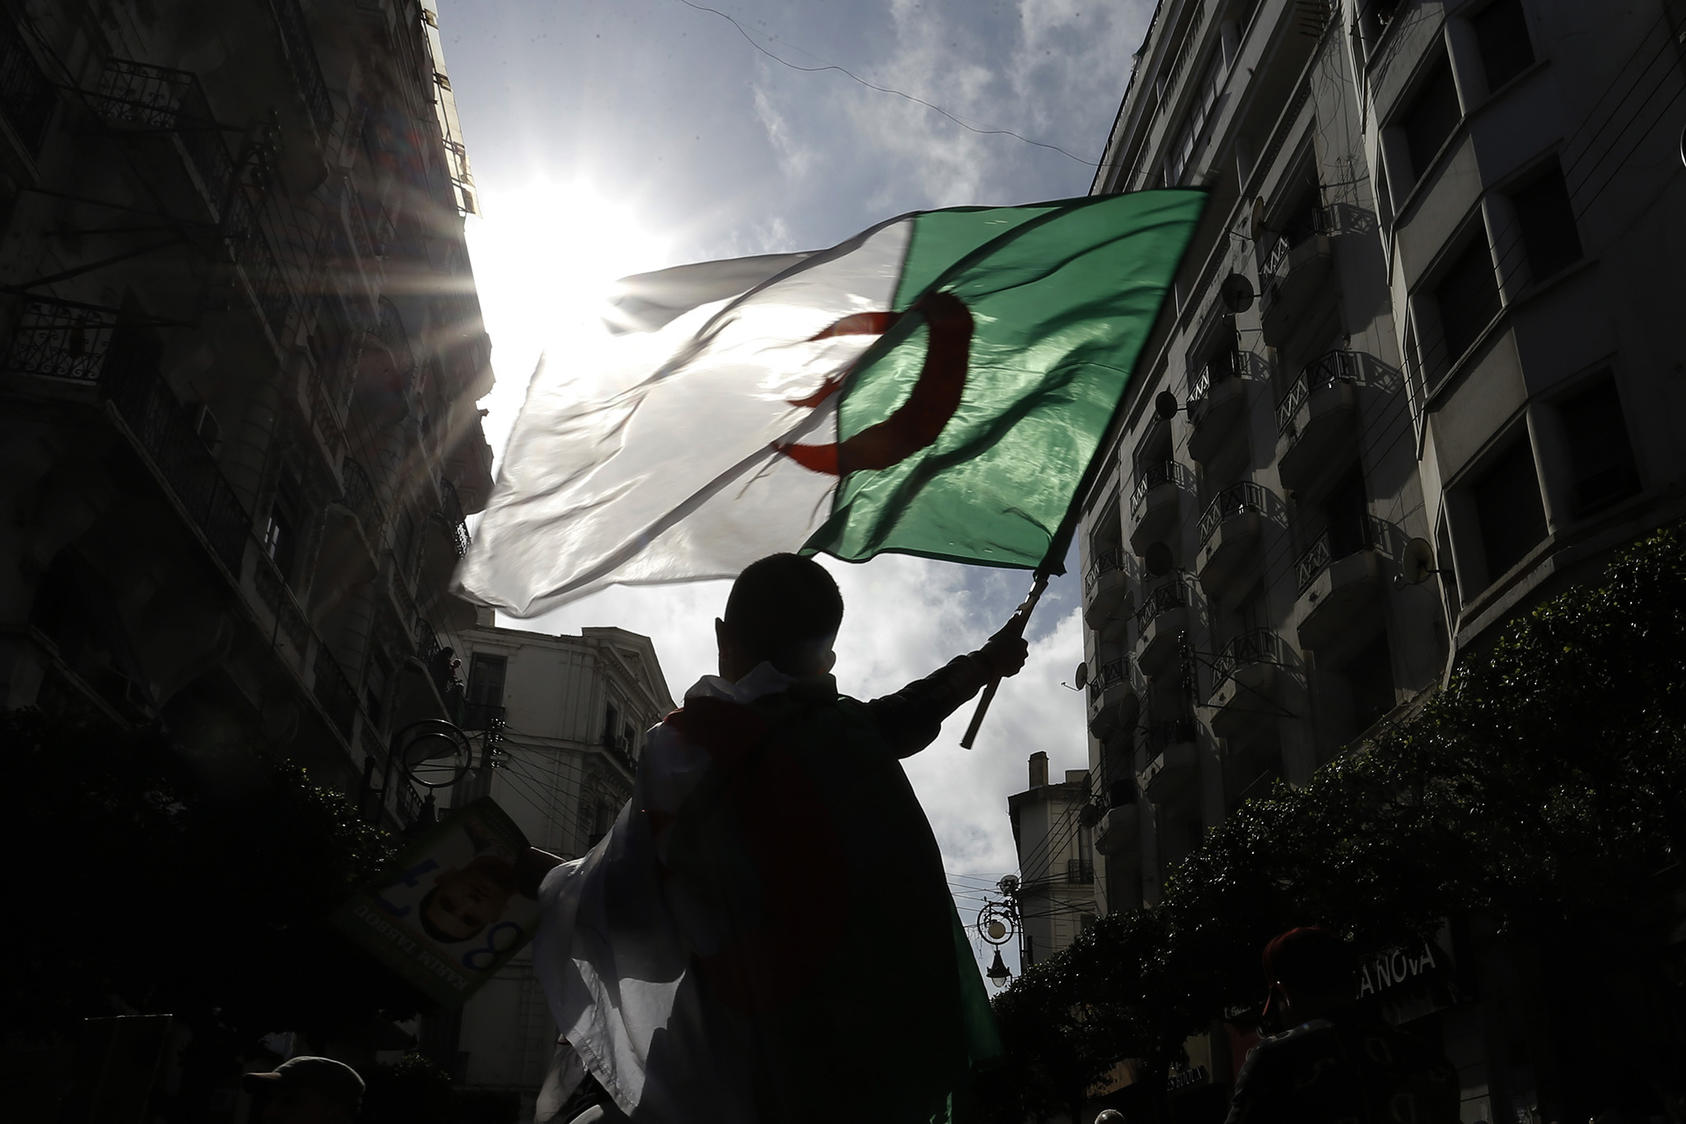 Thousands of Algerians took to the streets to commemorate the first anniversary of the popular protests in Algiers on February 21, 2020. (Photo by Toufik Doudou/AP)